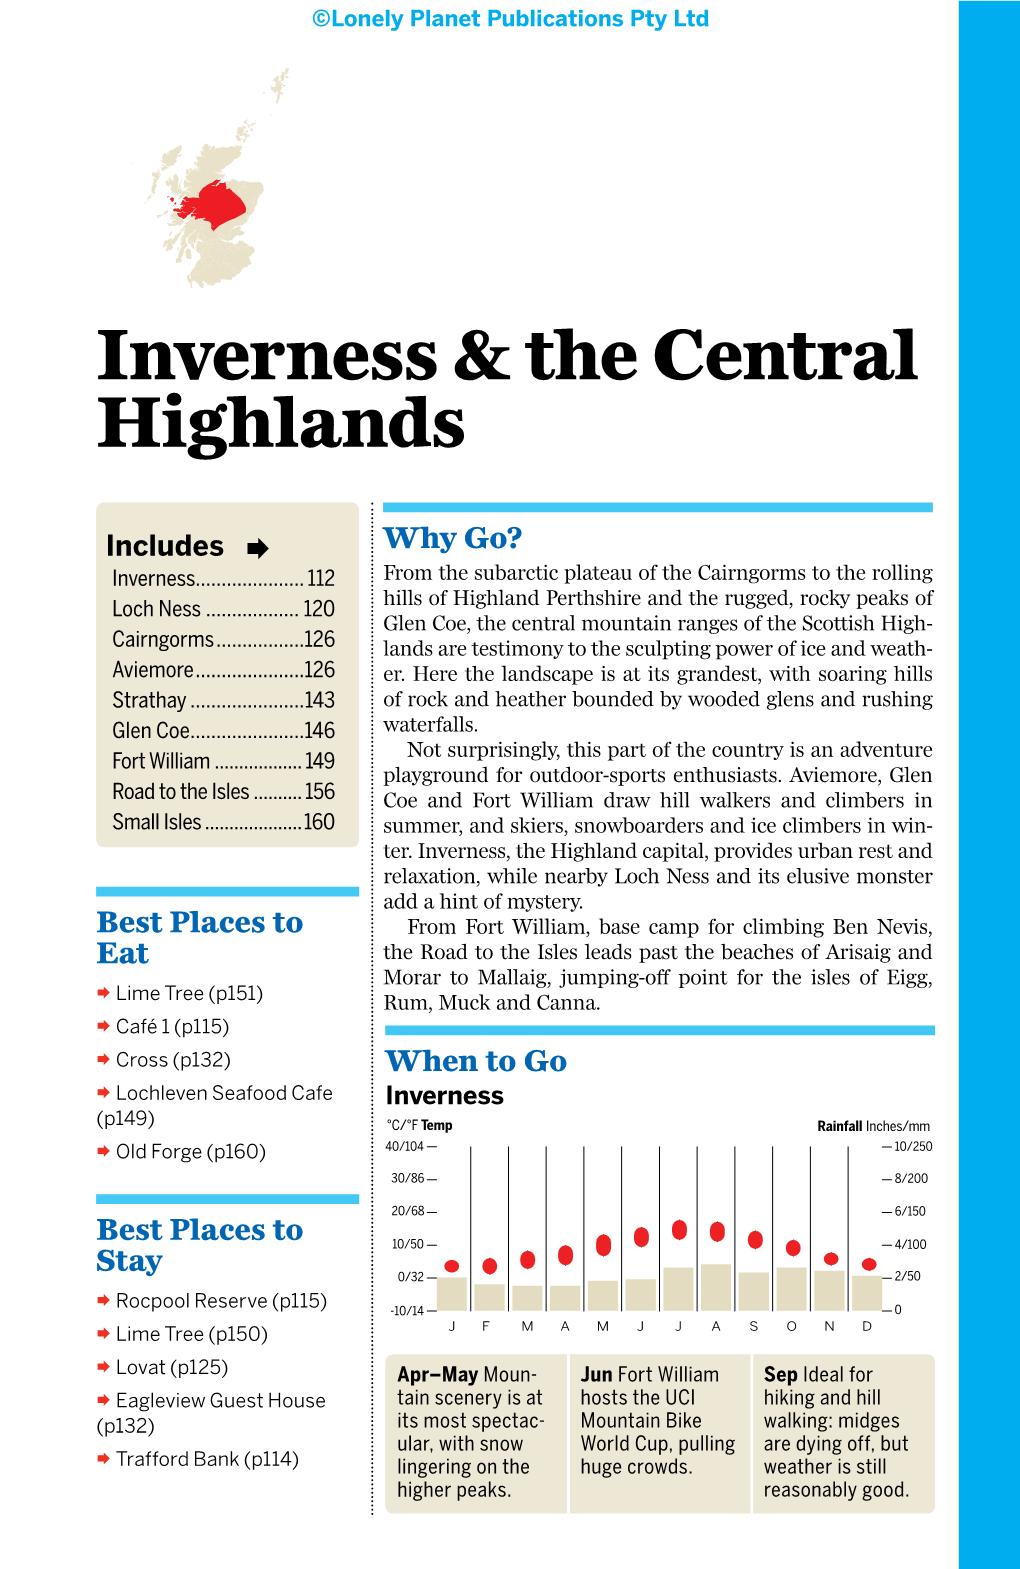 Inverness & the Central Highlands